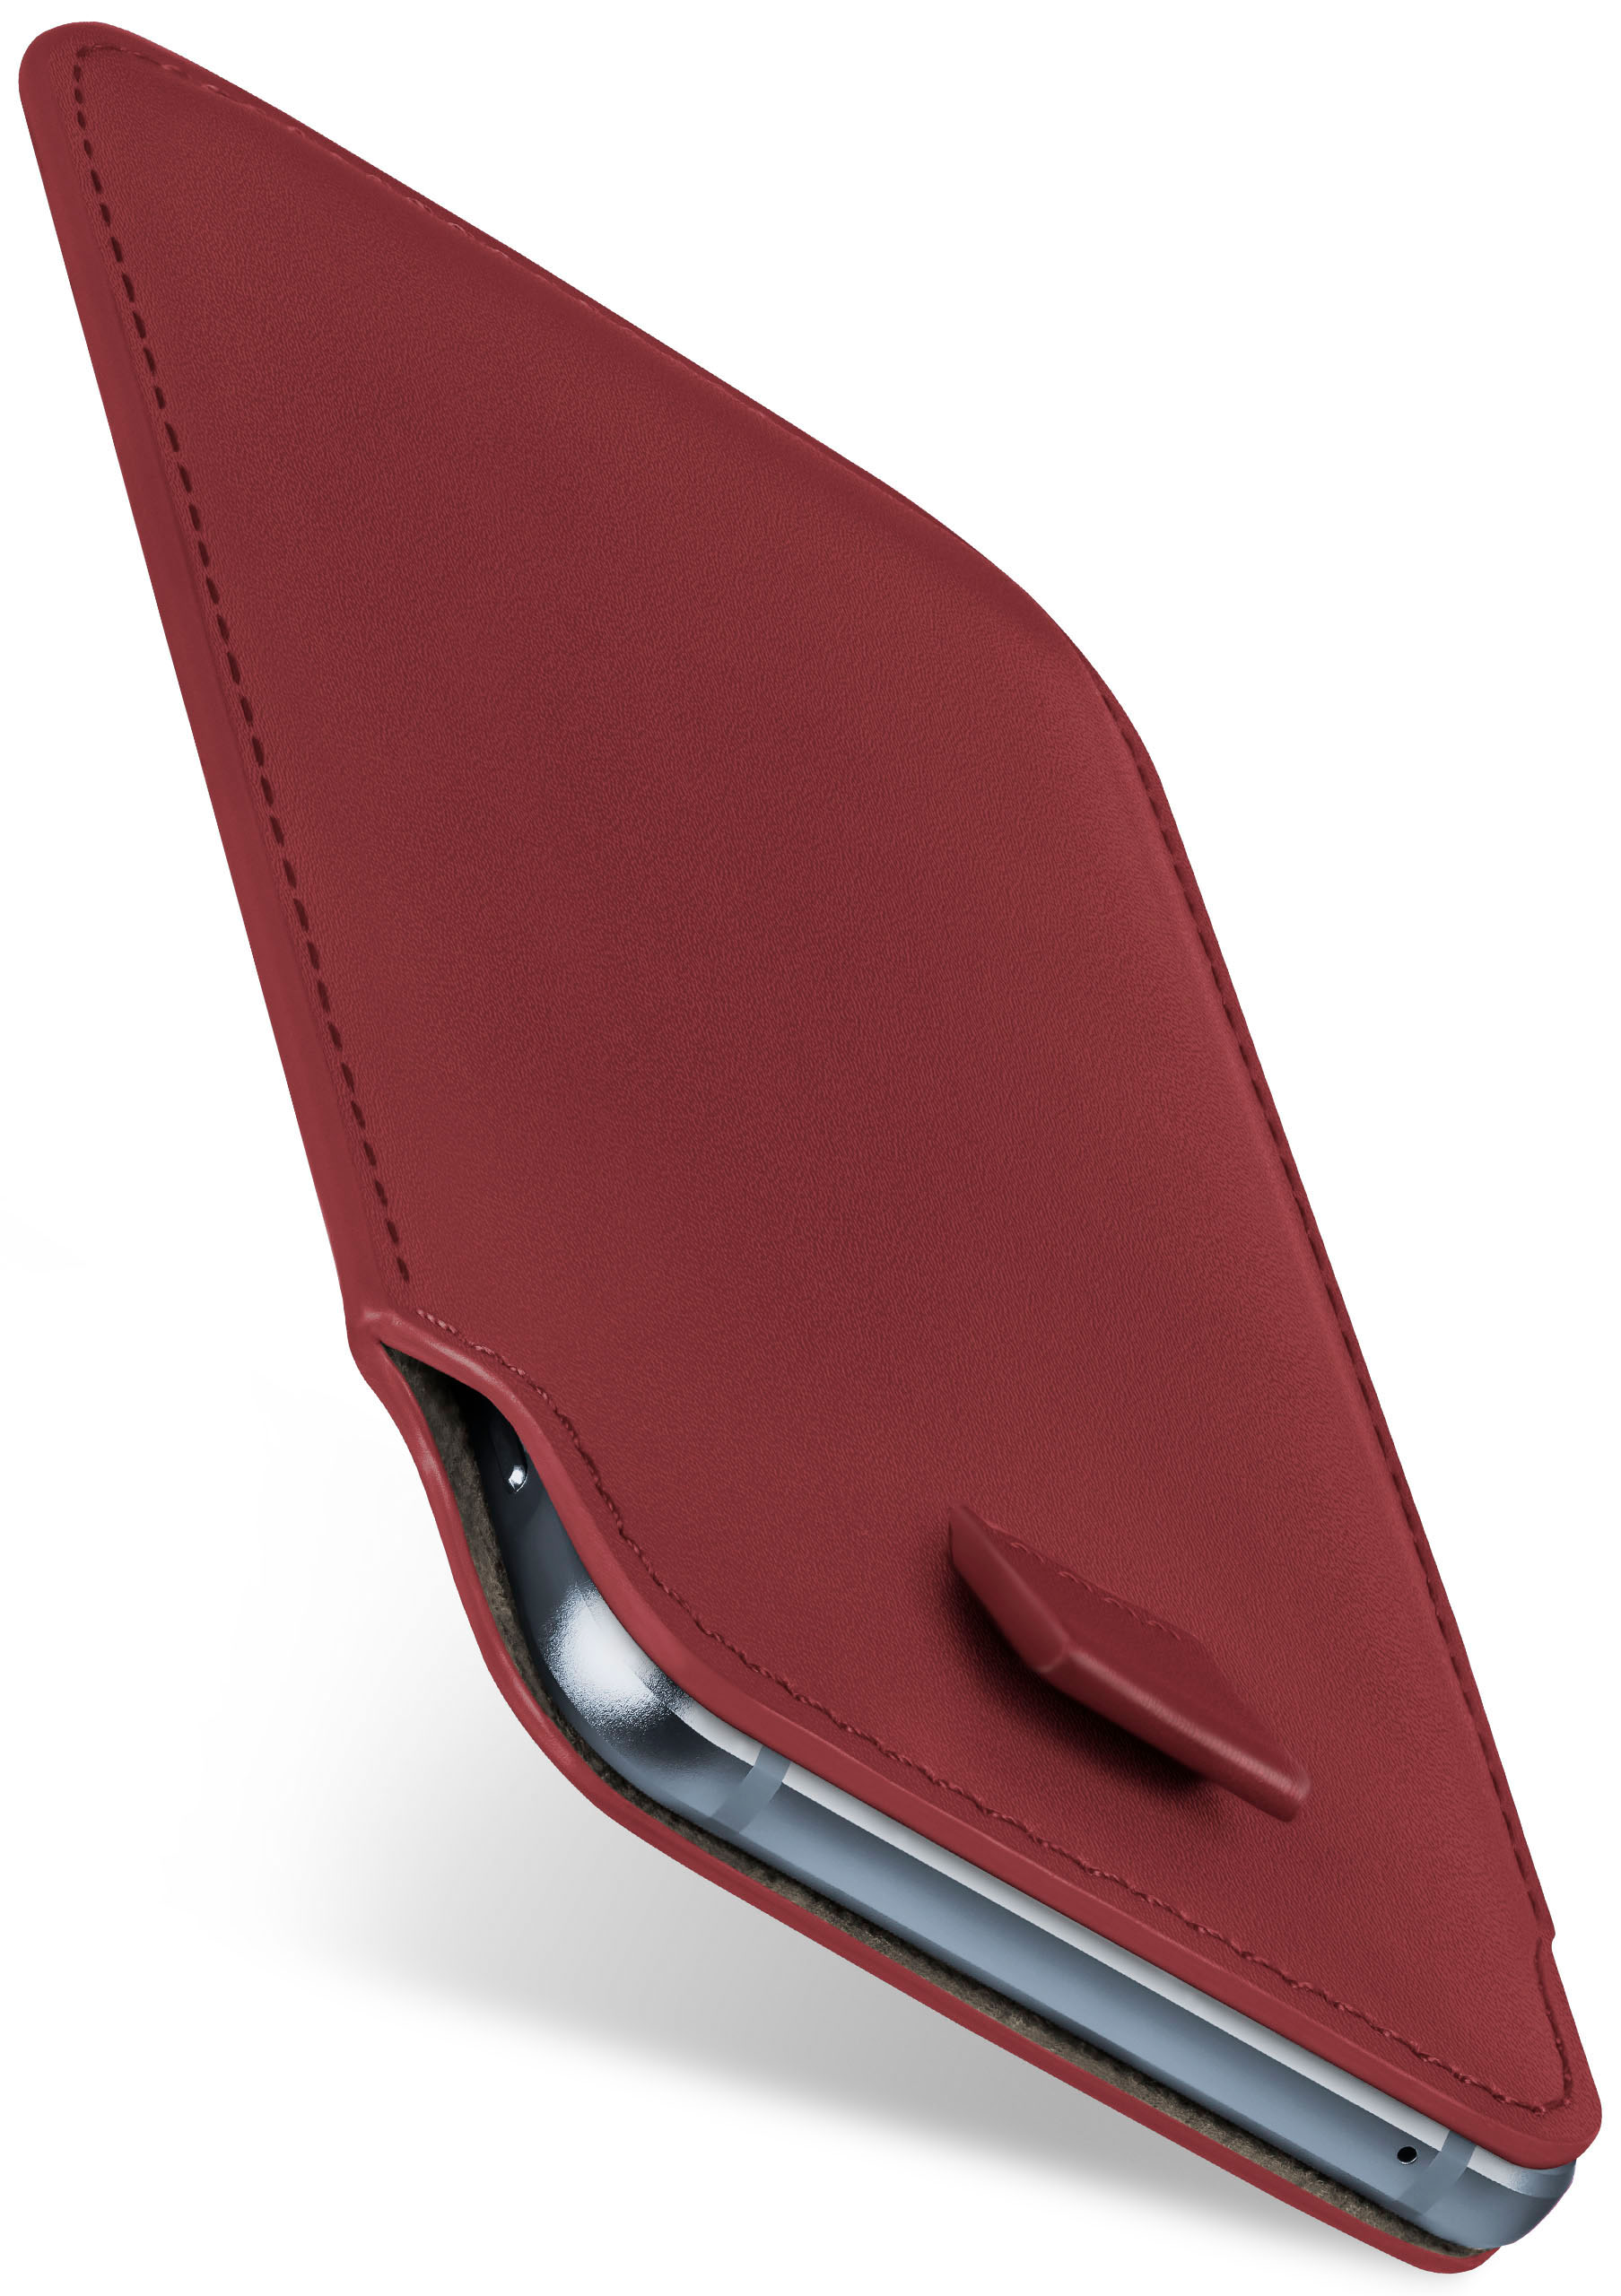 MOEX Slide Case, Cover, S21, Maroon-Red Full Galaxy Samsung